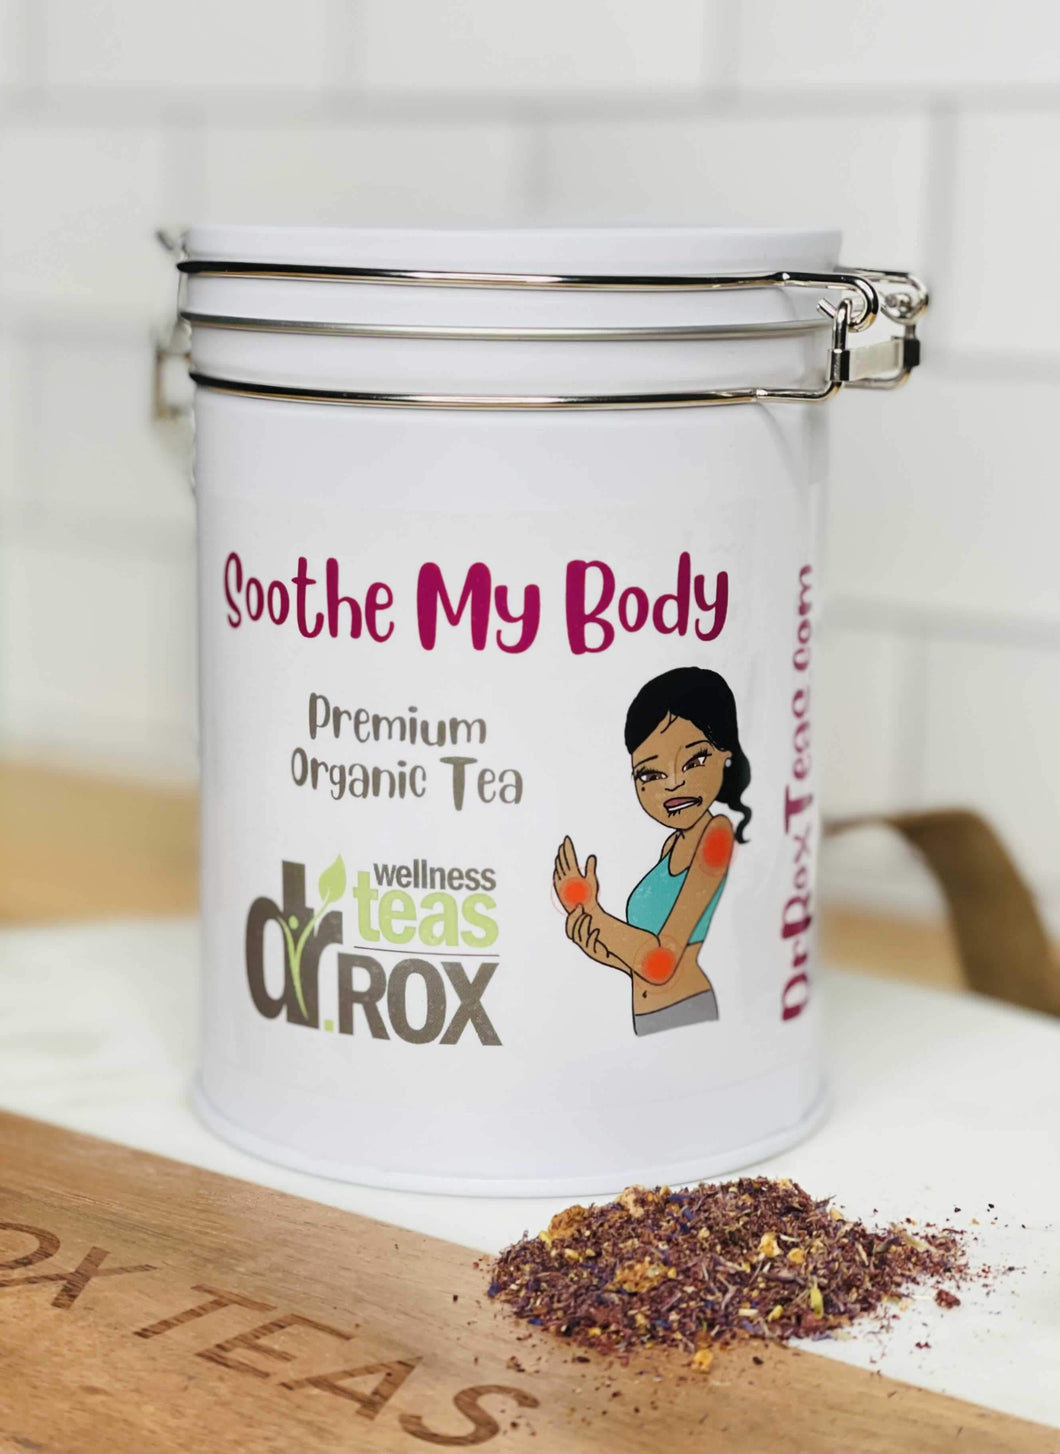 Soothe My Body - Dr. Rox Wellness 